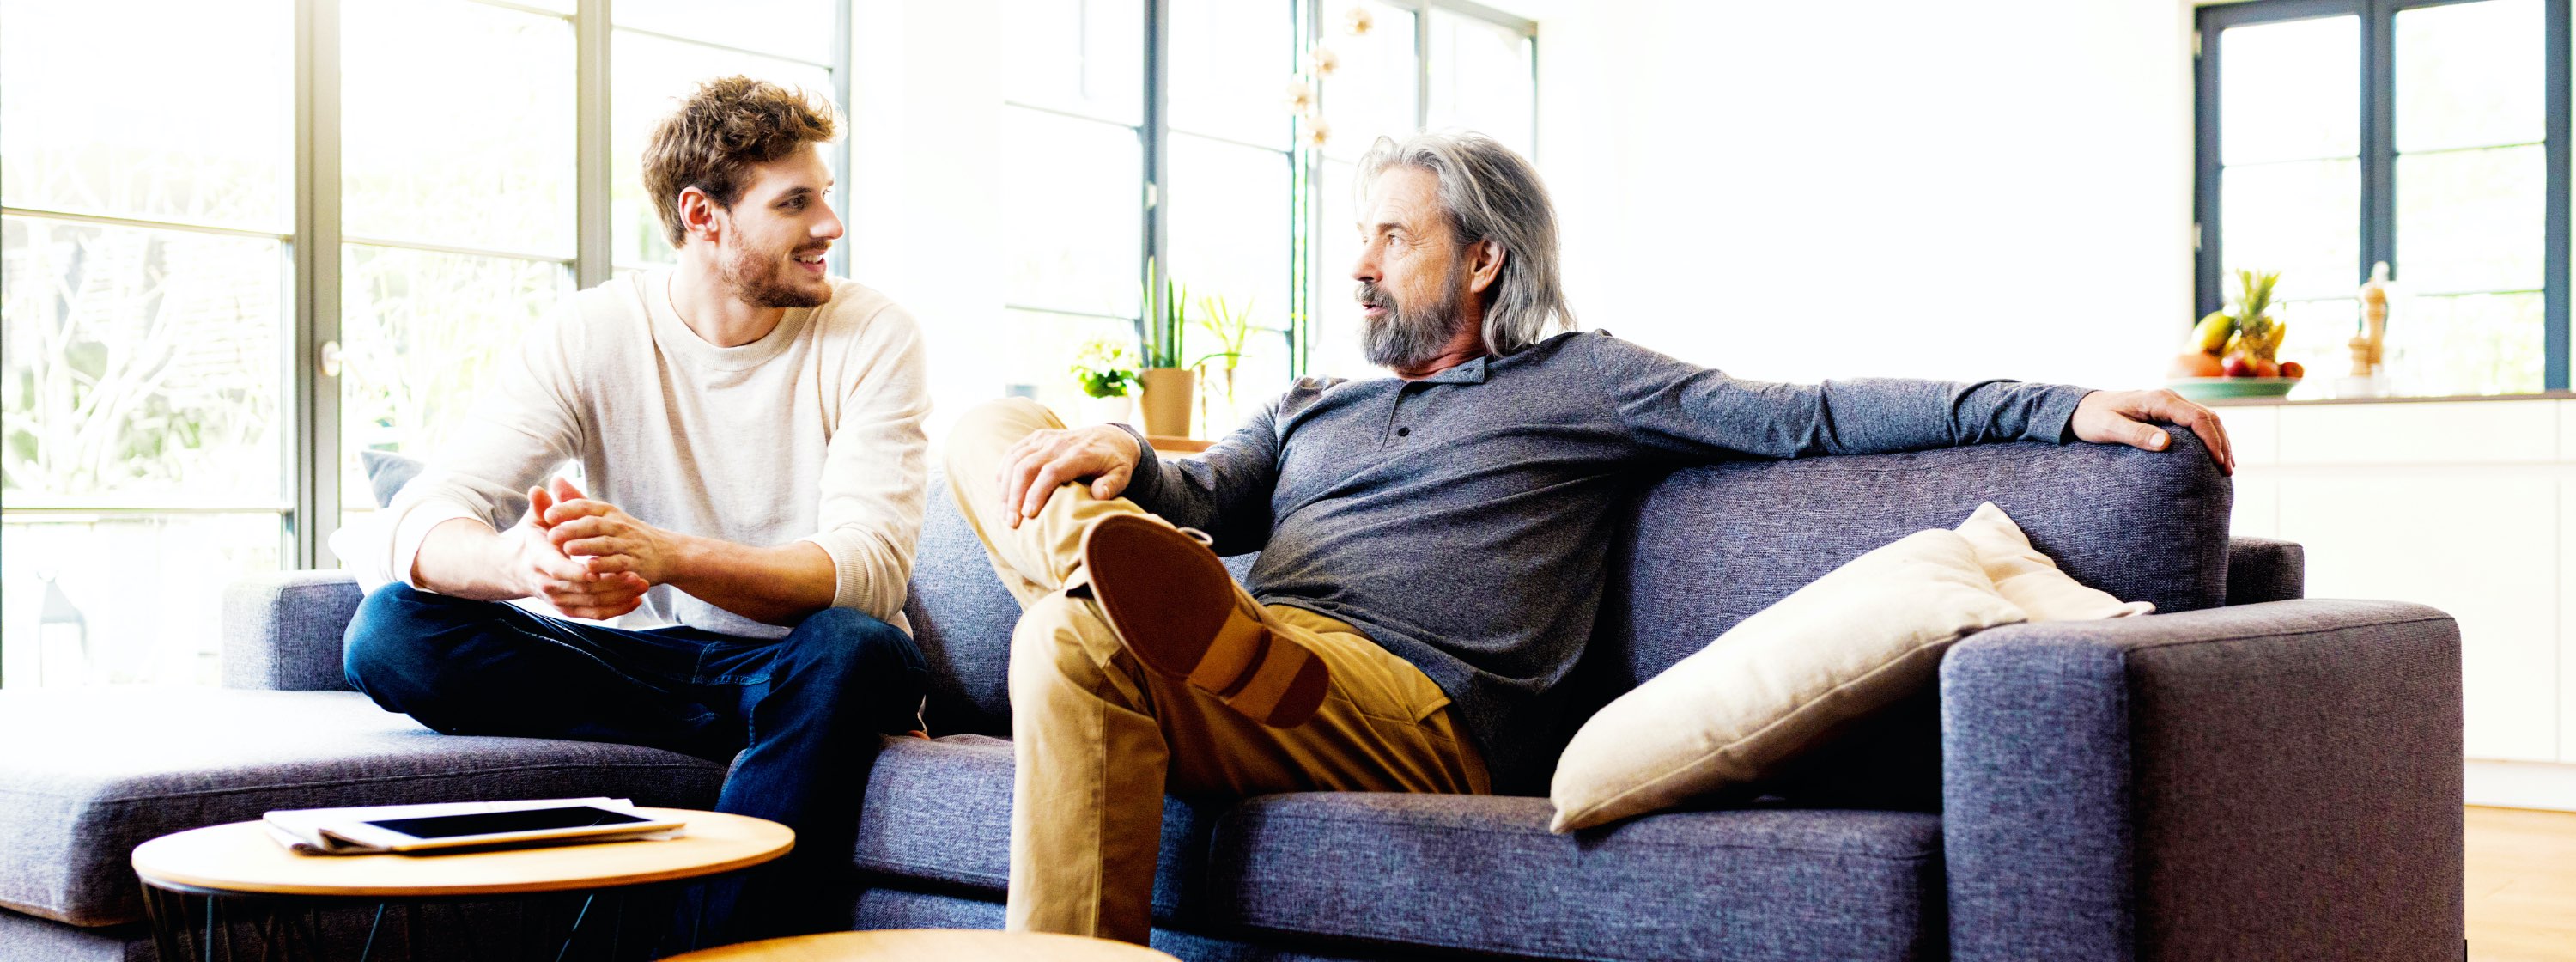 A father and his adult son sit on a couch, talking